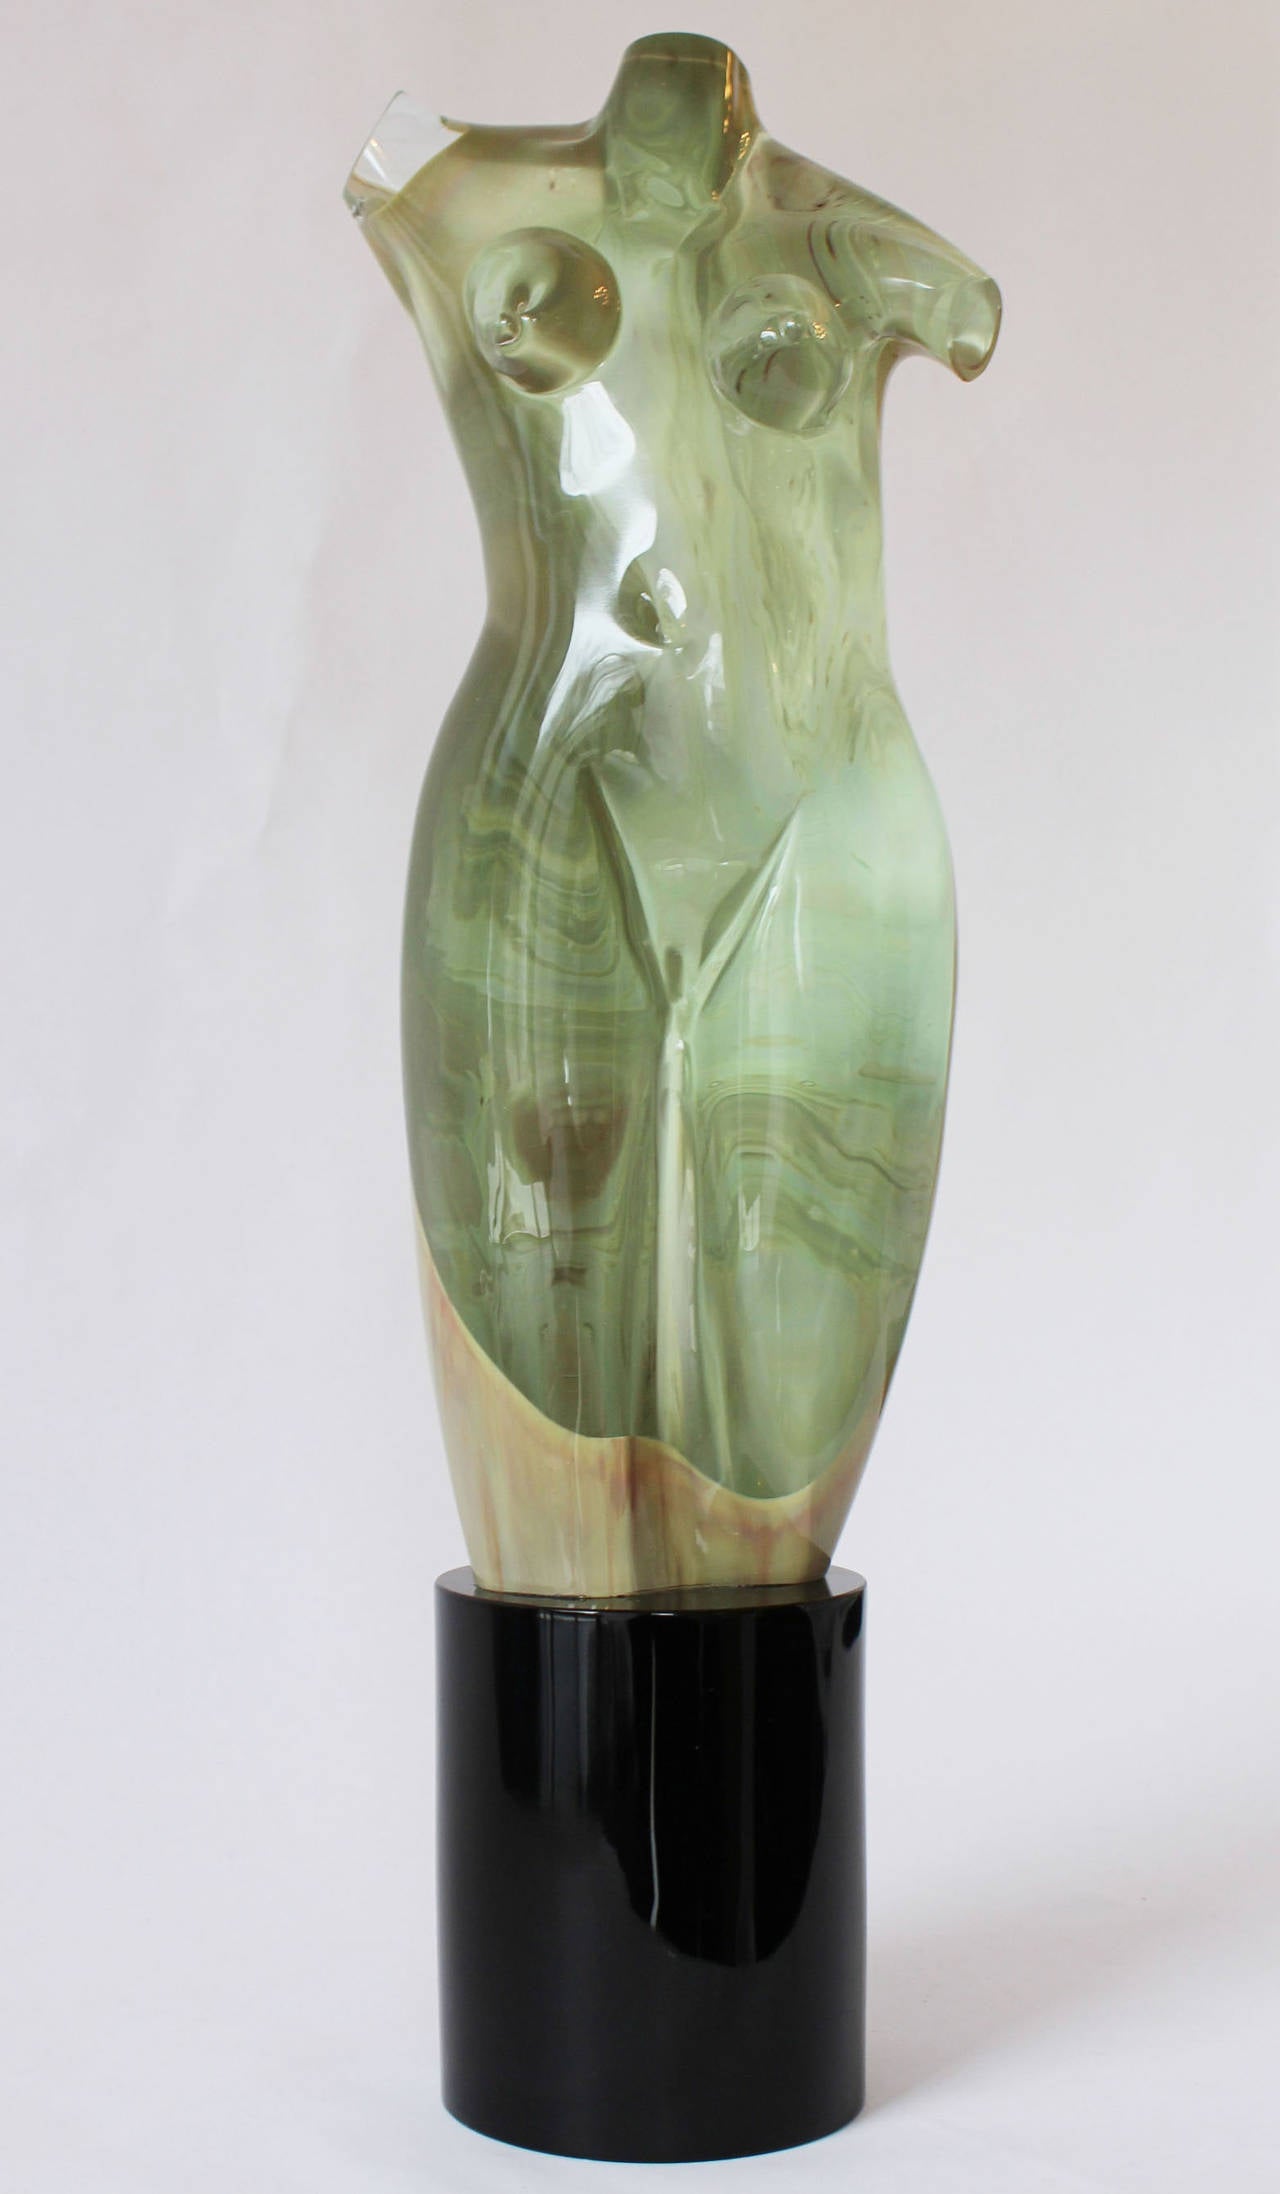 A beautifully executed solid Murano glass sculpture, clear, with marbleized cased glass details and 6 inch high black glass base, attributed to Pino Signoretto.